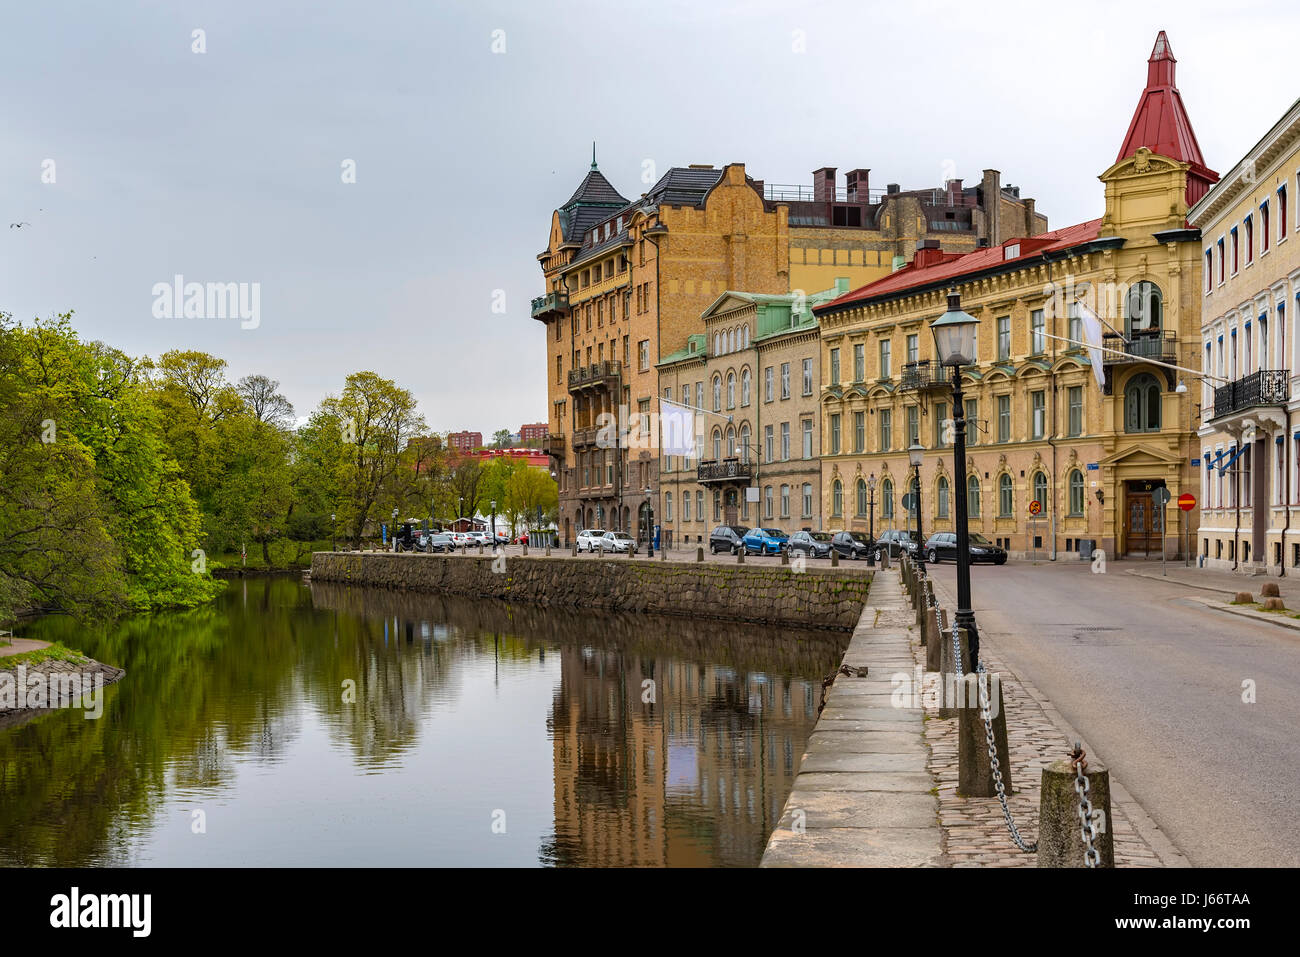 A typical city scene from the main canal that runs through Gothenburg in Sweden. Stock Photo